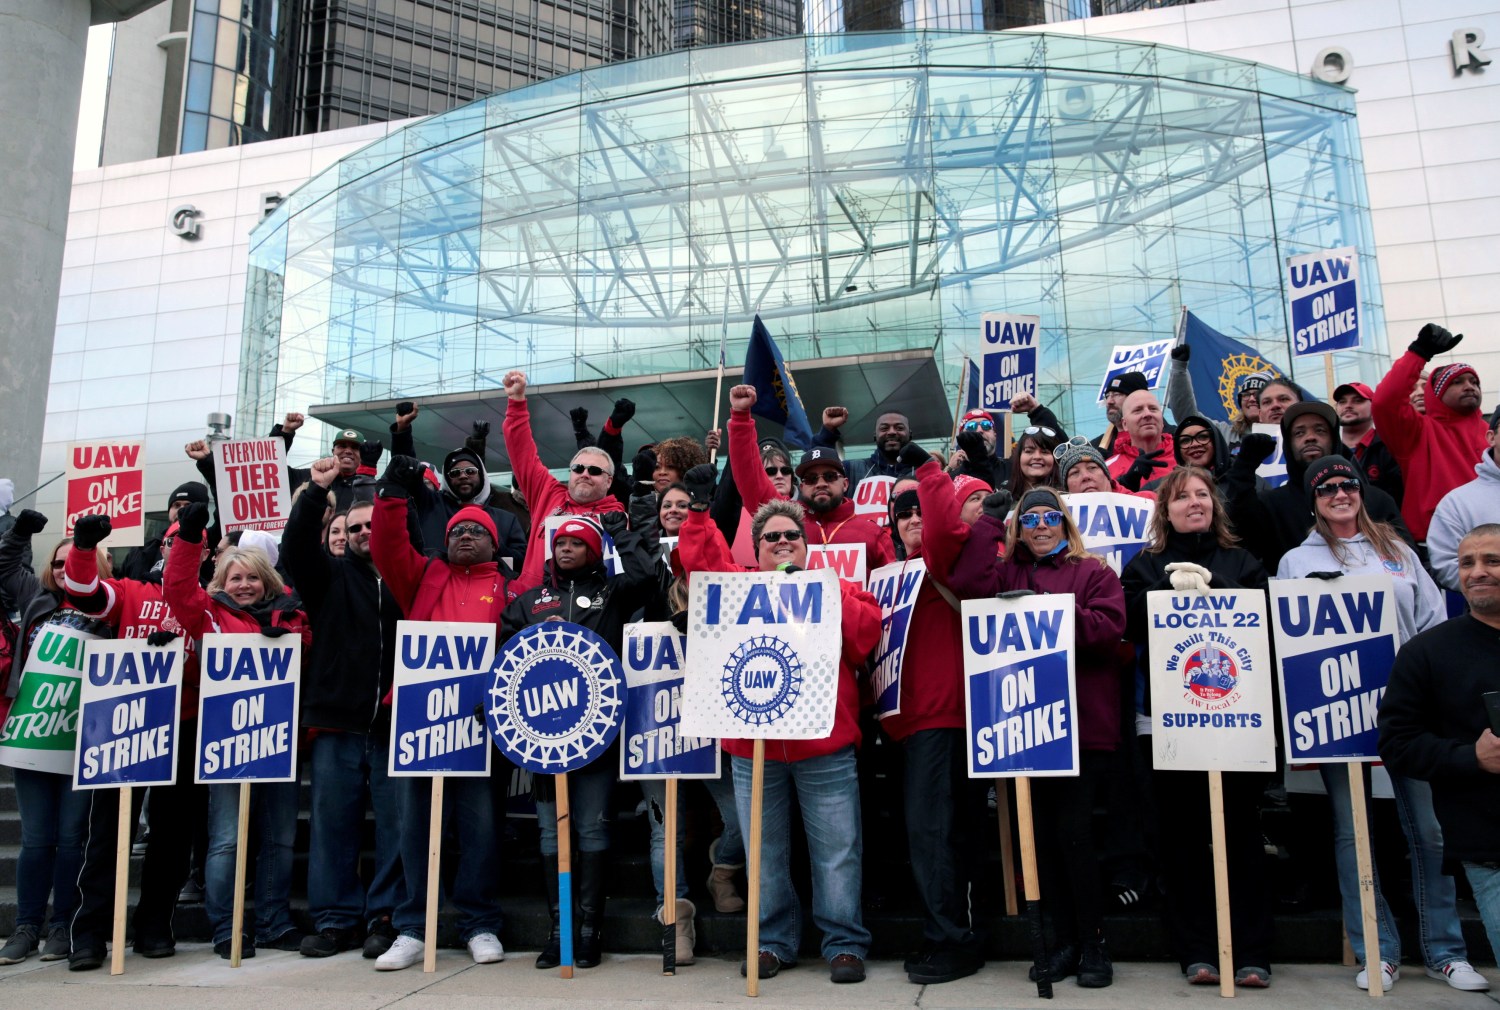 Striking United Auto Workers (UAW) members rally in front of General Motors World headquarters in Detroit, Michigan, U.S., October 17, 2019. REUTERS/Rebecca Cook - RC16E3895BA0